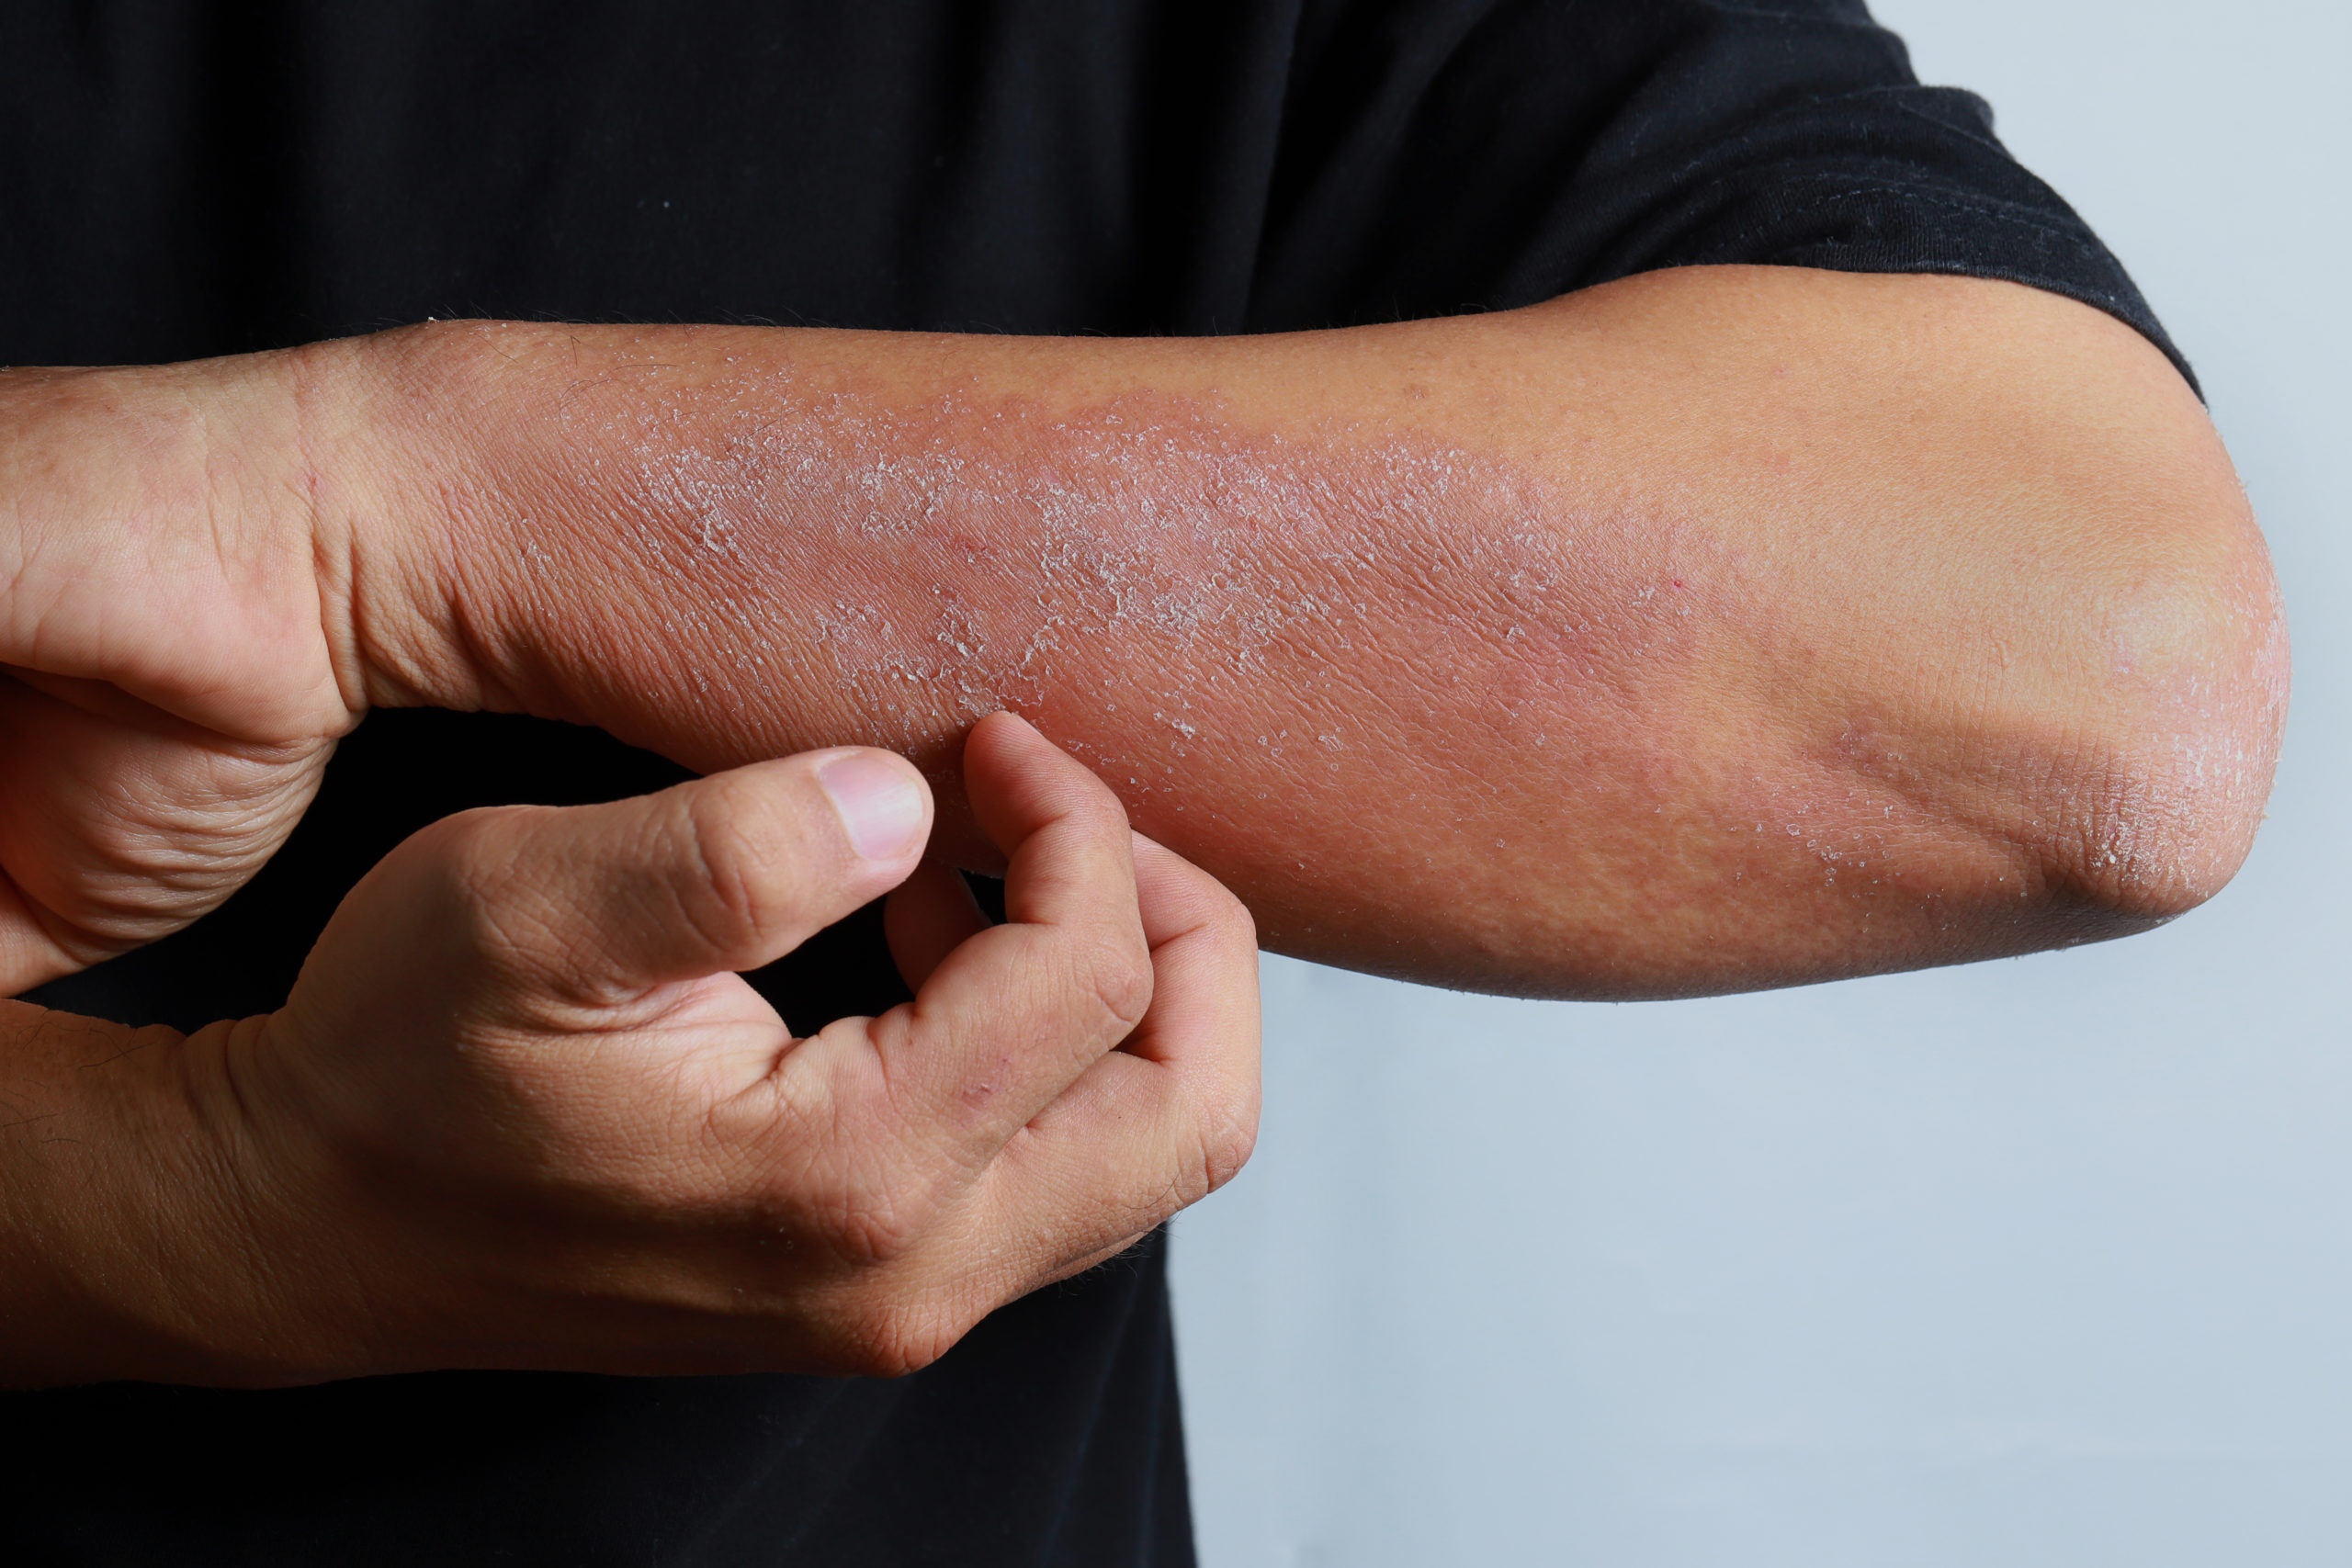 Image of a man scratching his forearm where there is a red/purple dry/scaly rash present